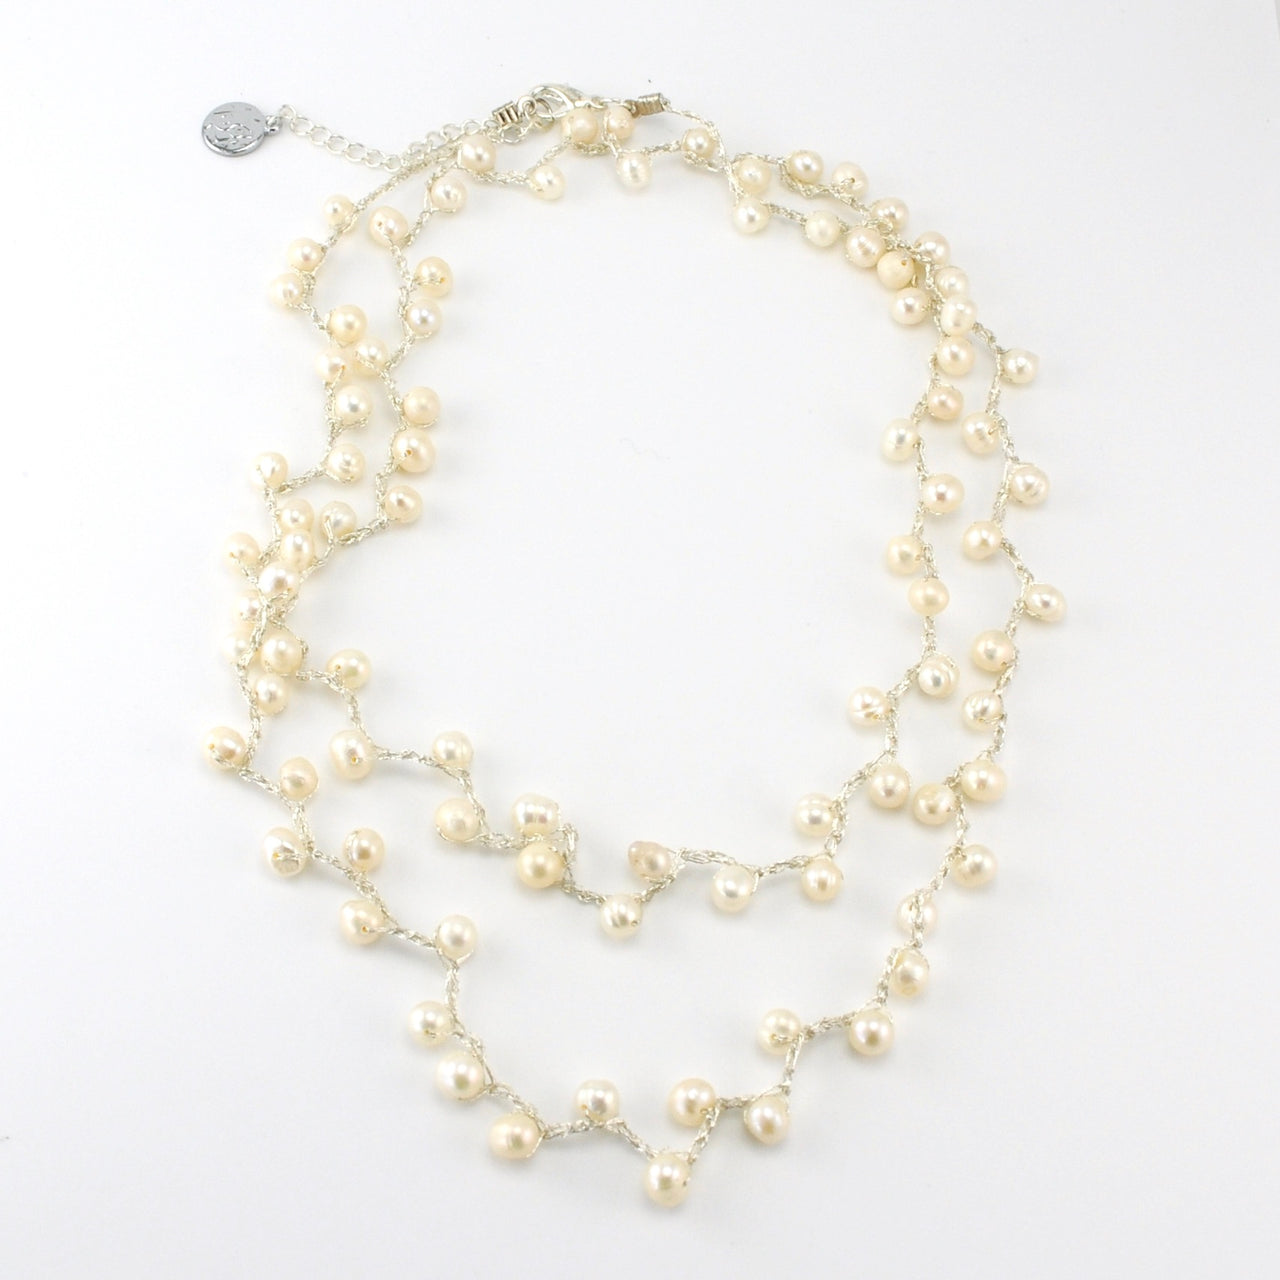 Japanese Silk 34" White Pearl Necklace